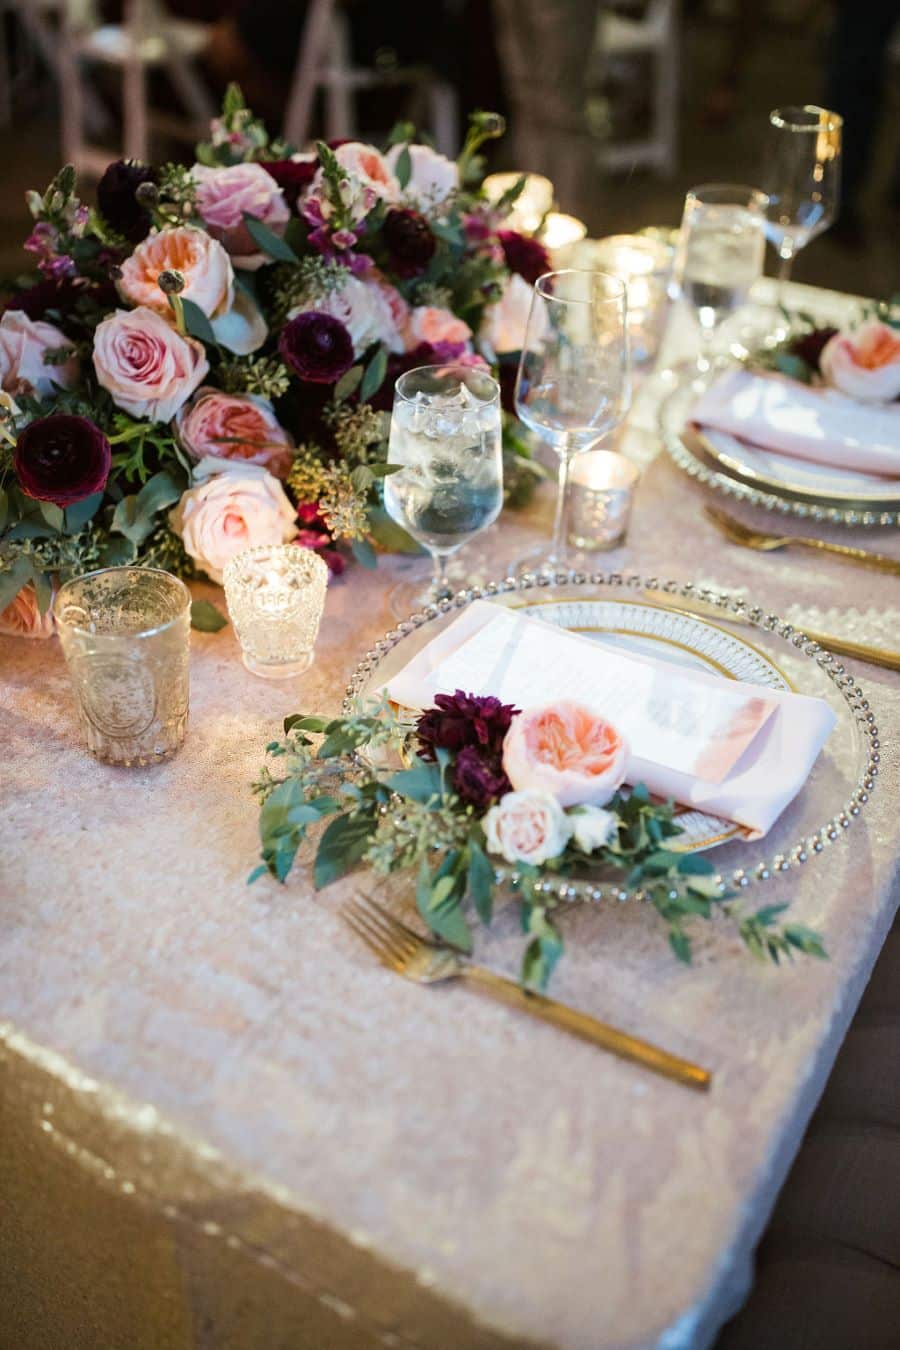 Sweetheart table with glitter tablecloth and lush floral centerpiece / romantic lgbtq / fall / September / blush / burgundy